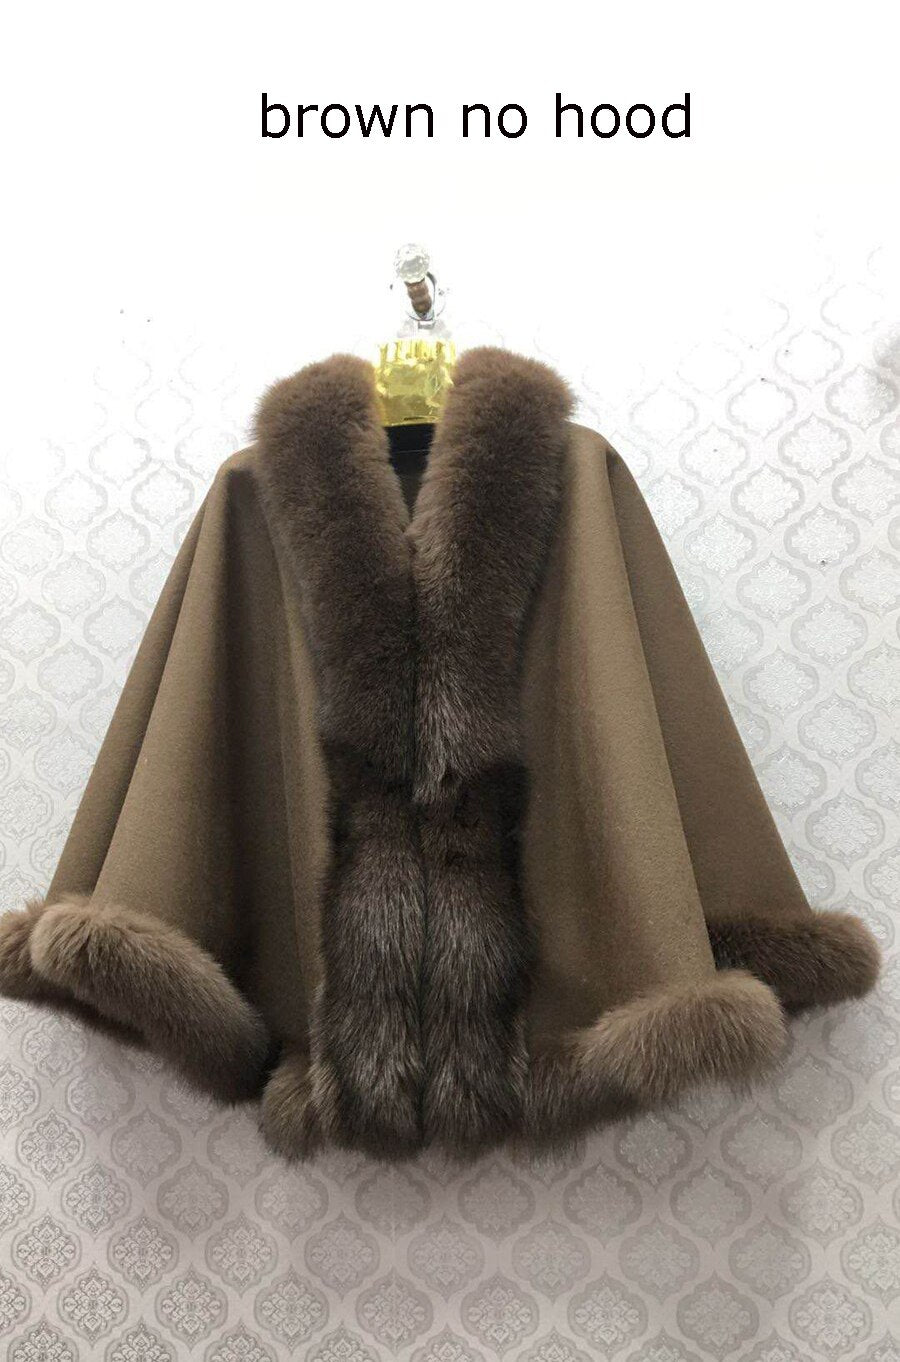 Cashmere Capes With Real Fur